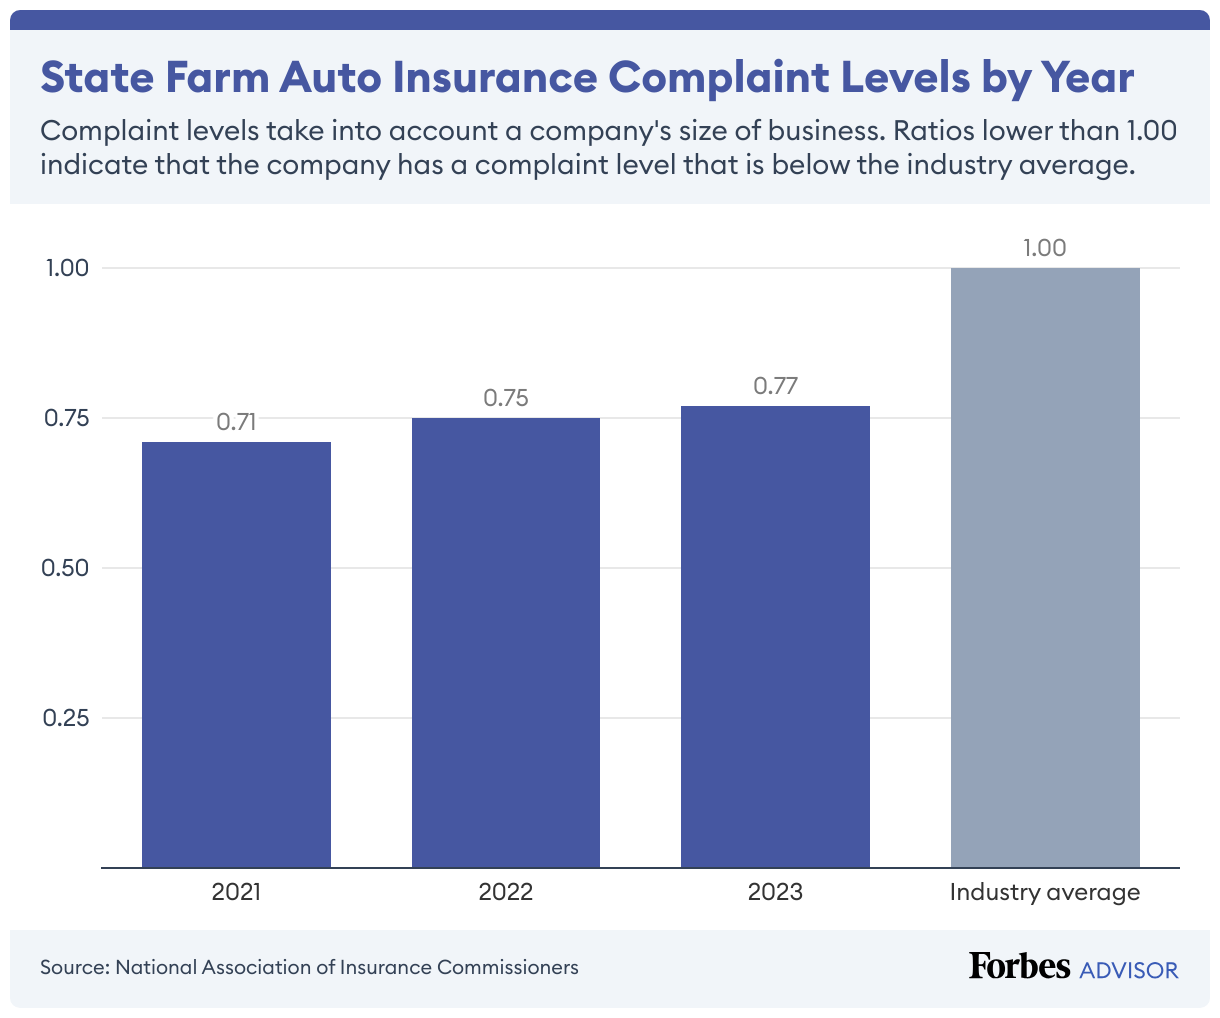 State Farm's complaint level has consistently, over the last three years, stayed below the industry average.